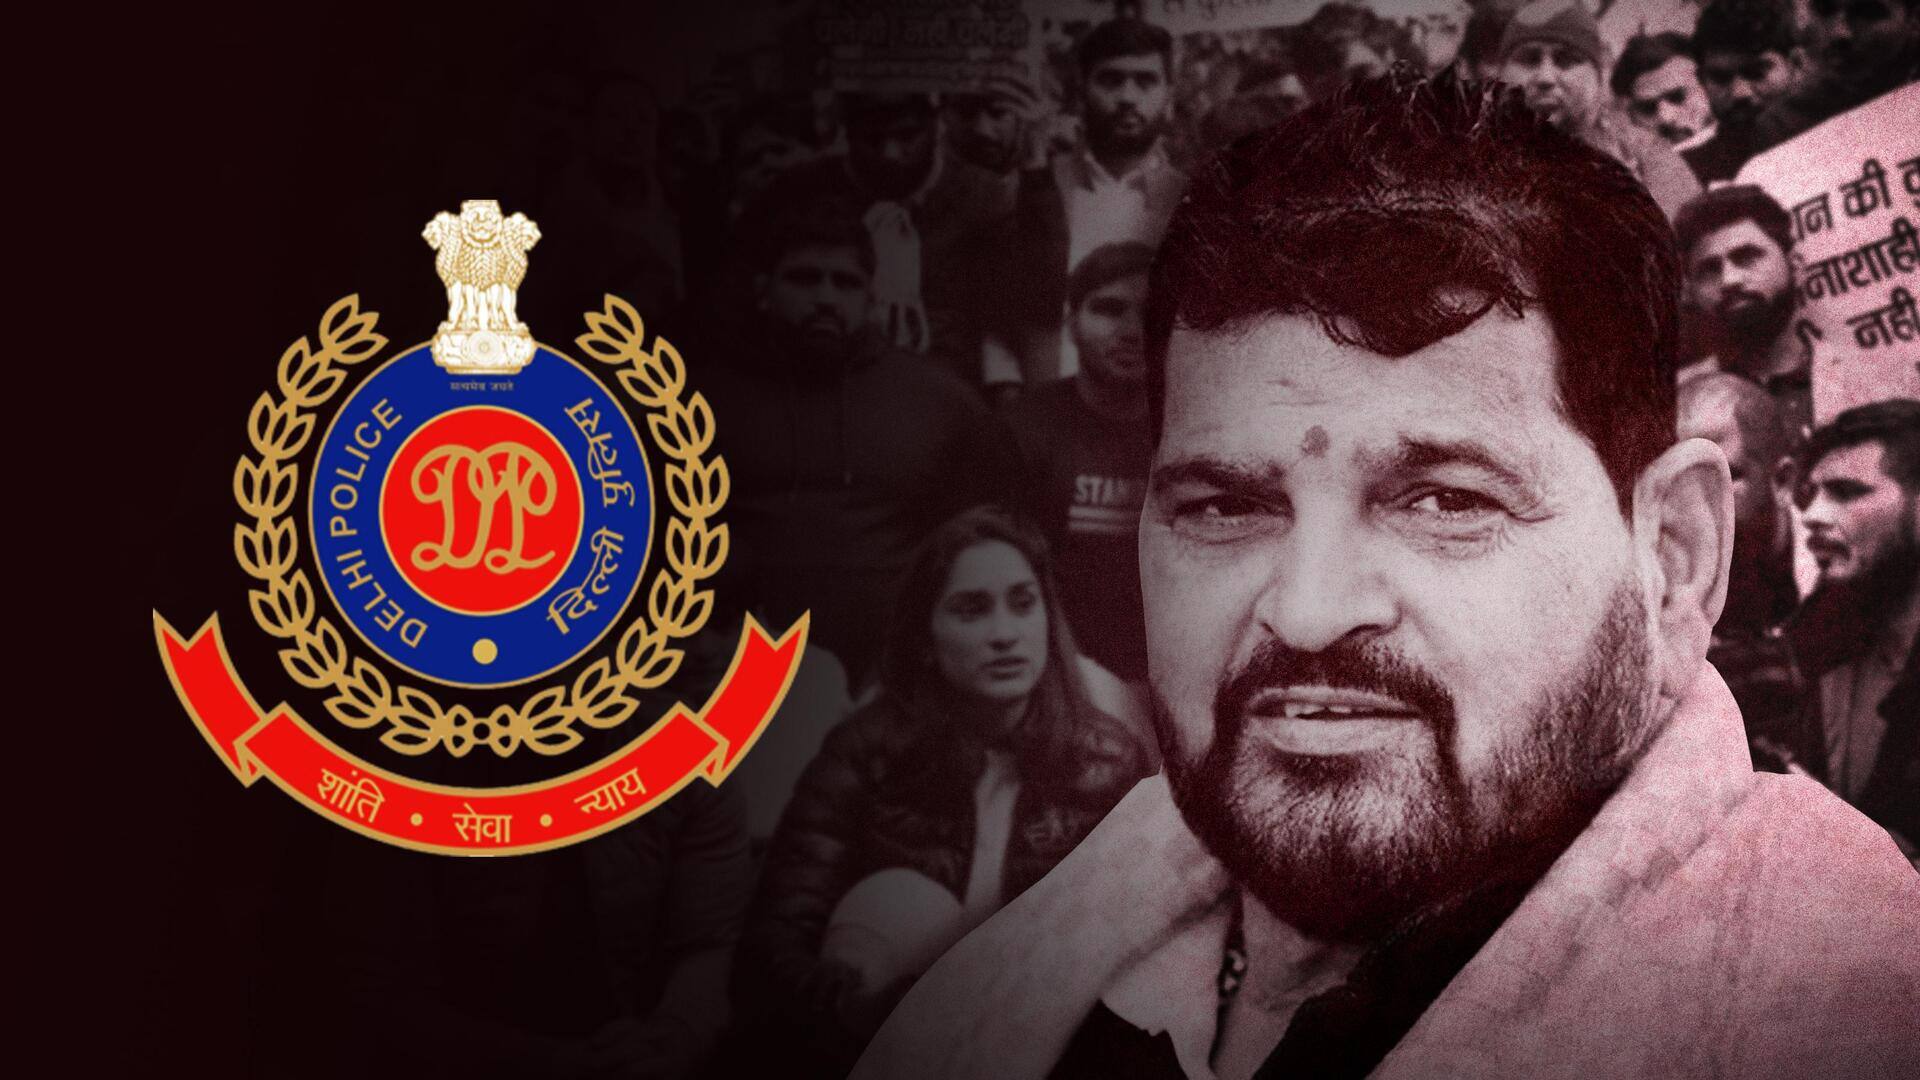 Didn't arrest Brij Bhushan because he 'cooperated': Delhi Police